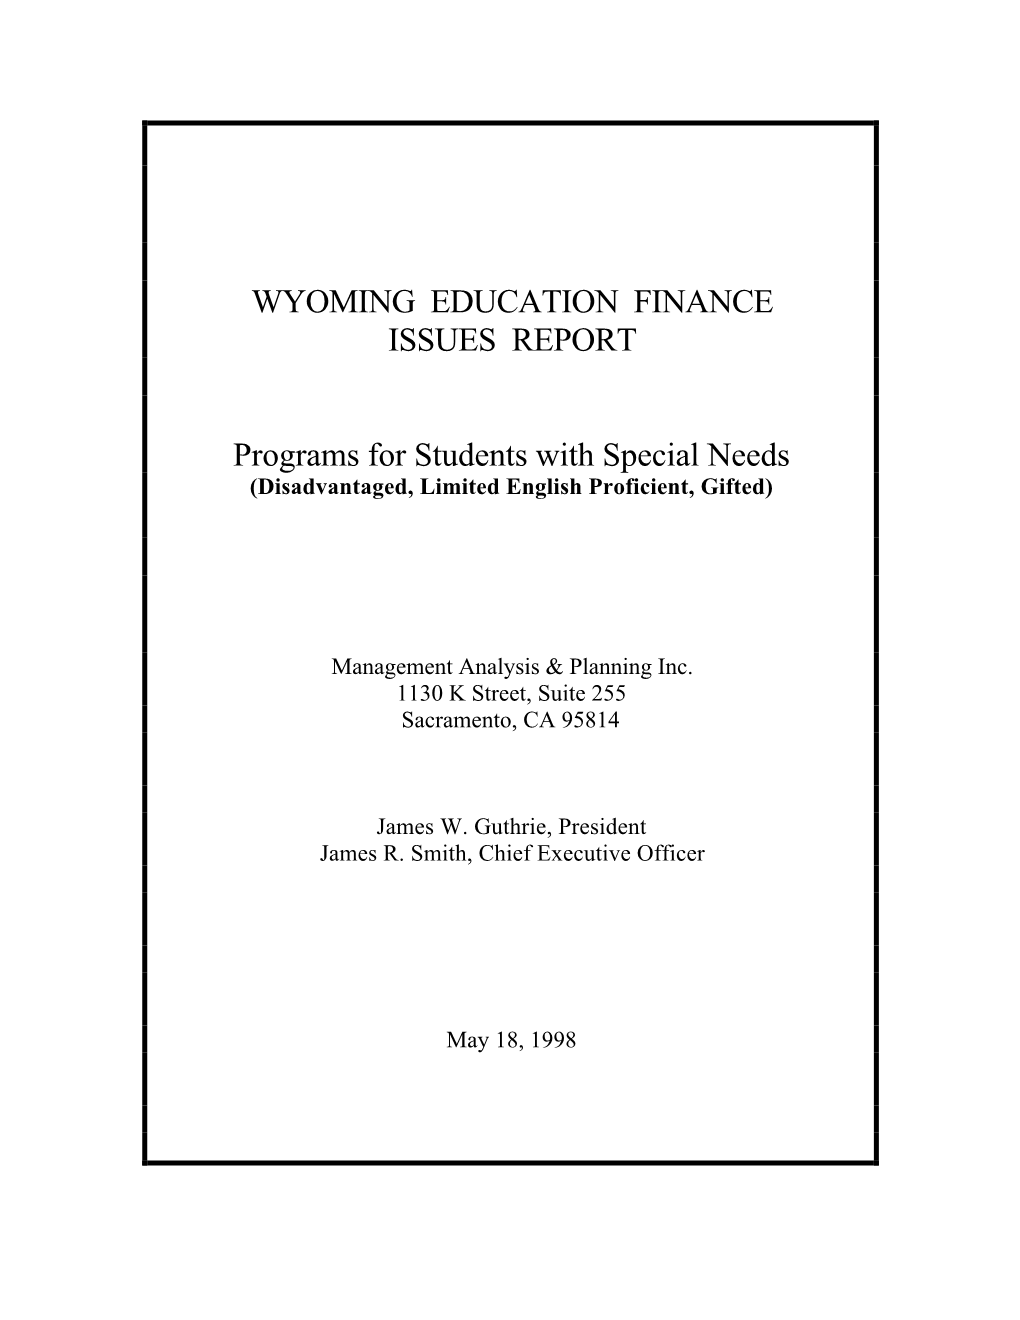 WYOMING EDUCATION FINANCE ISSUES REPORT Programs for Students with Special Needs